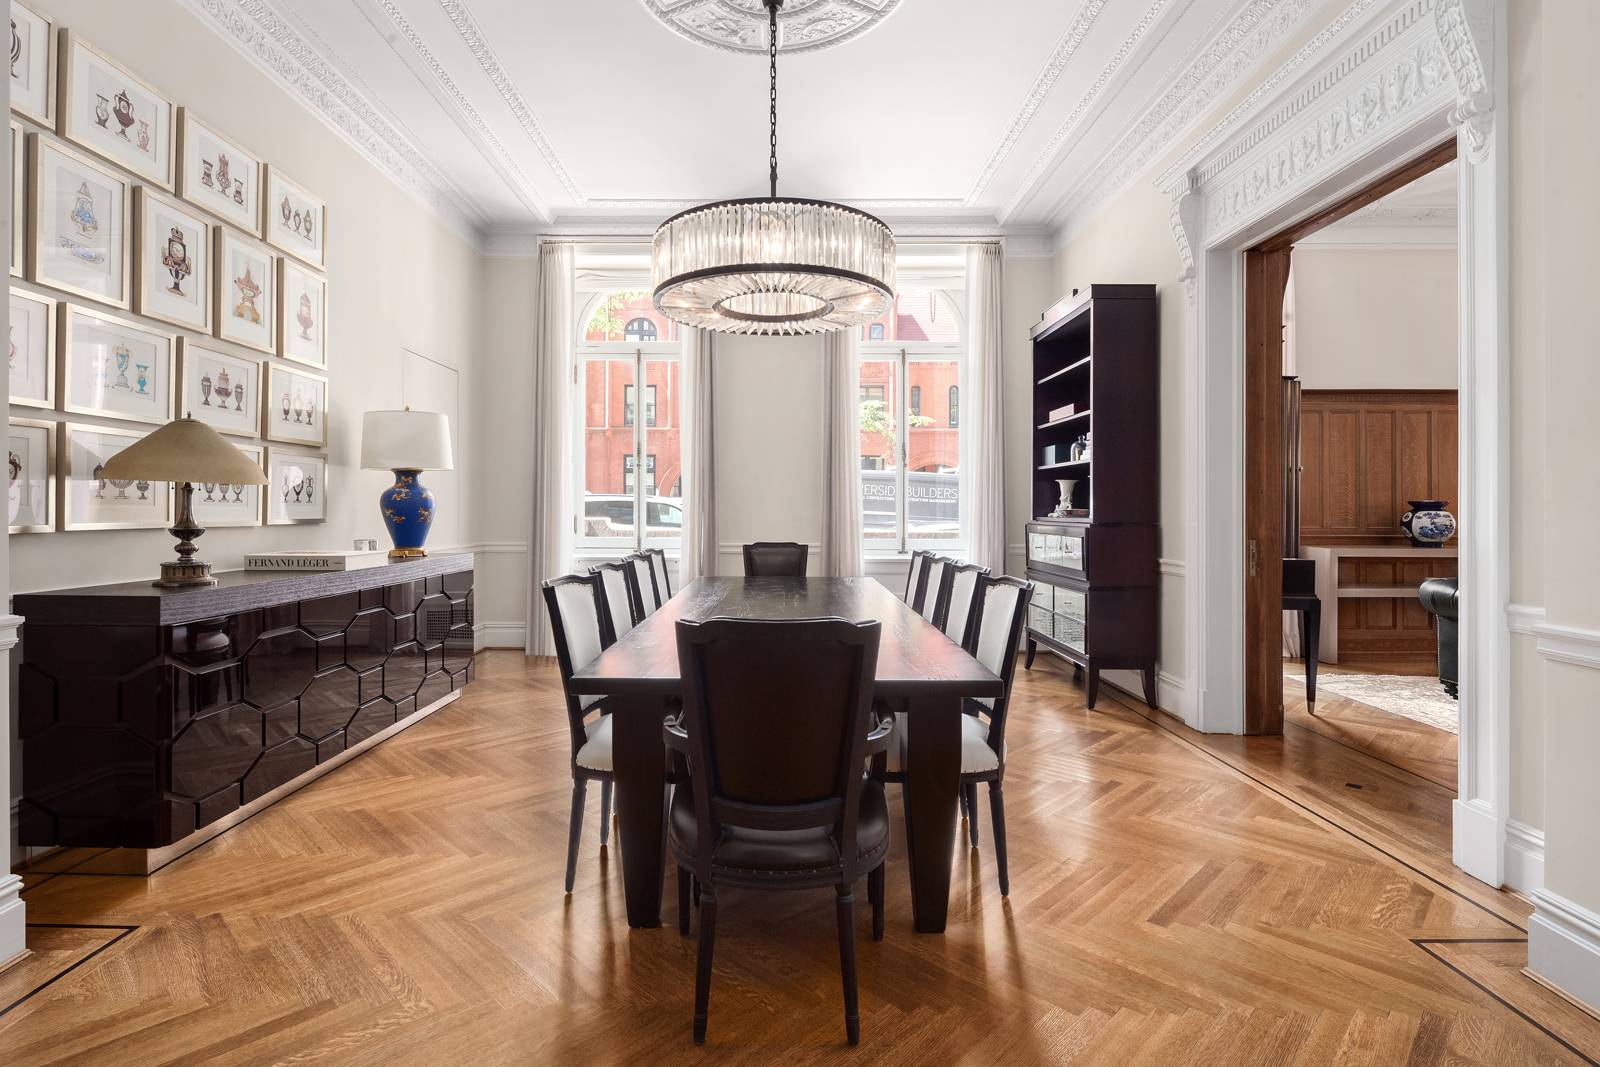 A mint condition duplex condo nestled a block away from Riverside Park in the landmarked Apthorp building, this 4 bedroom, 3.